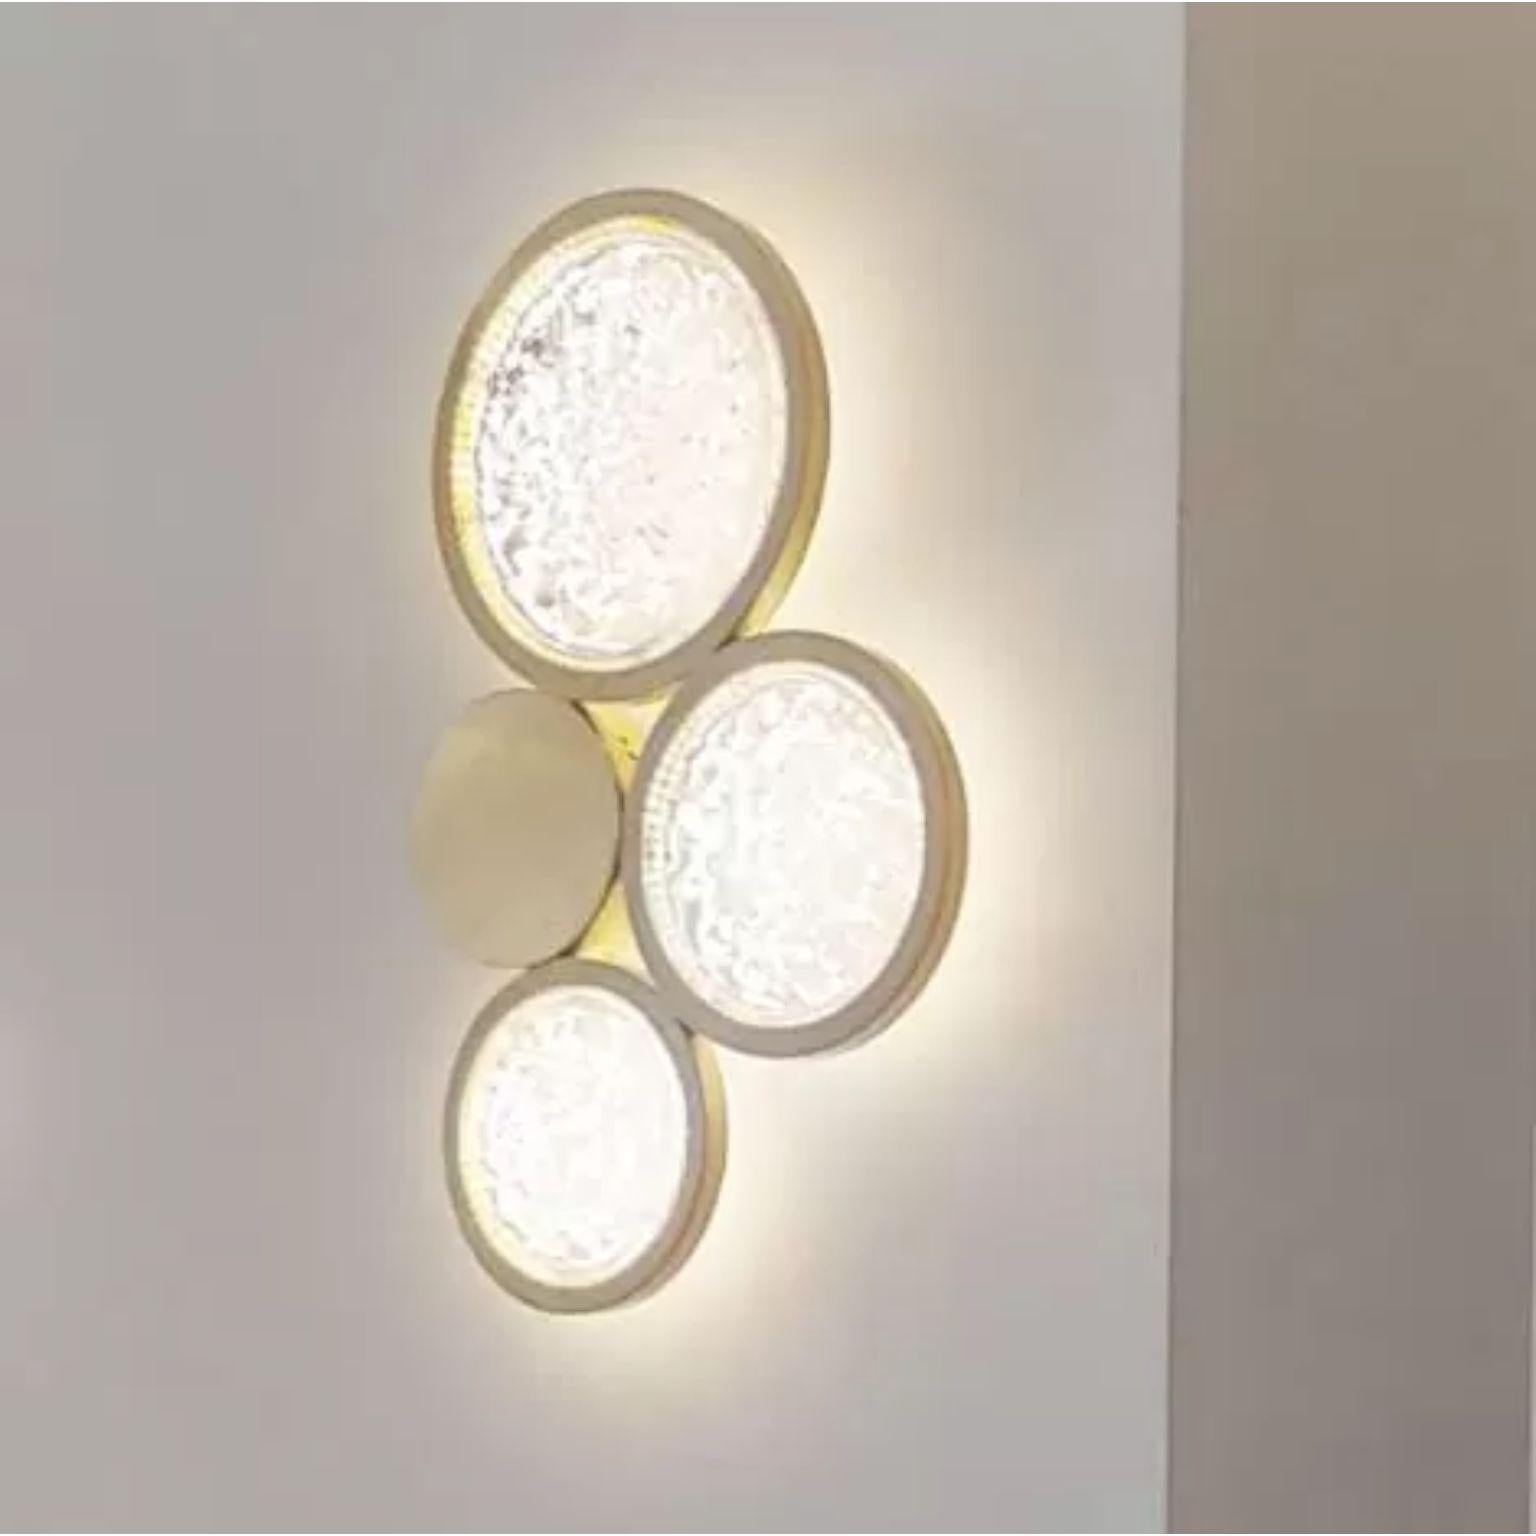 Crystal and Brass Circles Wall Sconce by Dainte
Dimensions: Ø 37 x H 58.5 cm.
Materials: Crystal and brass. 

A unique brass wall sconce that consists of three circles of glistening textured crystal plus one circle of Brass all joined together in a